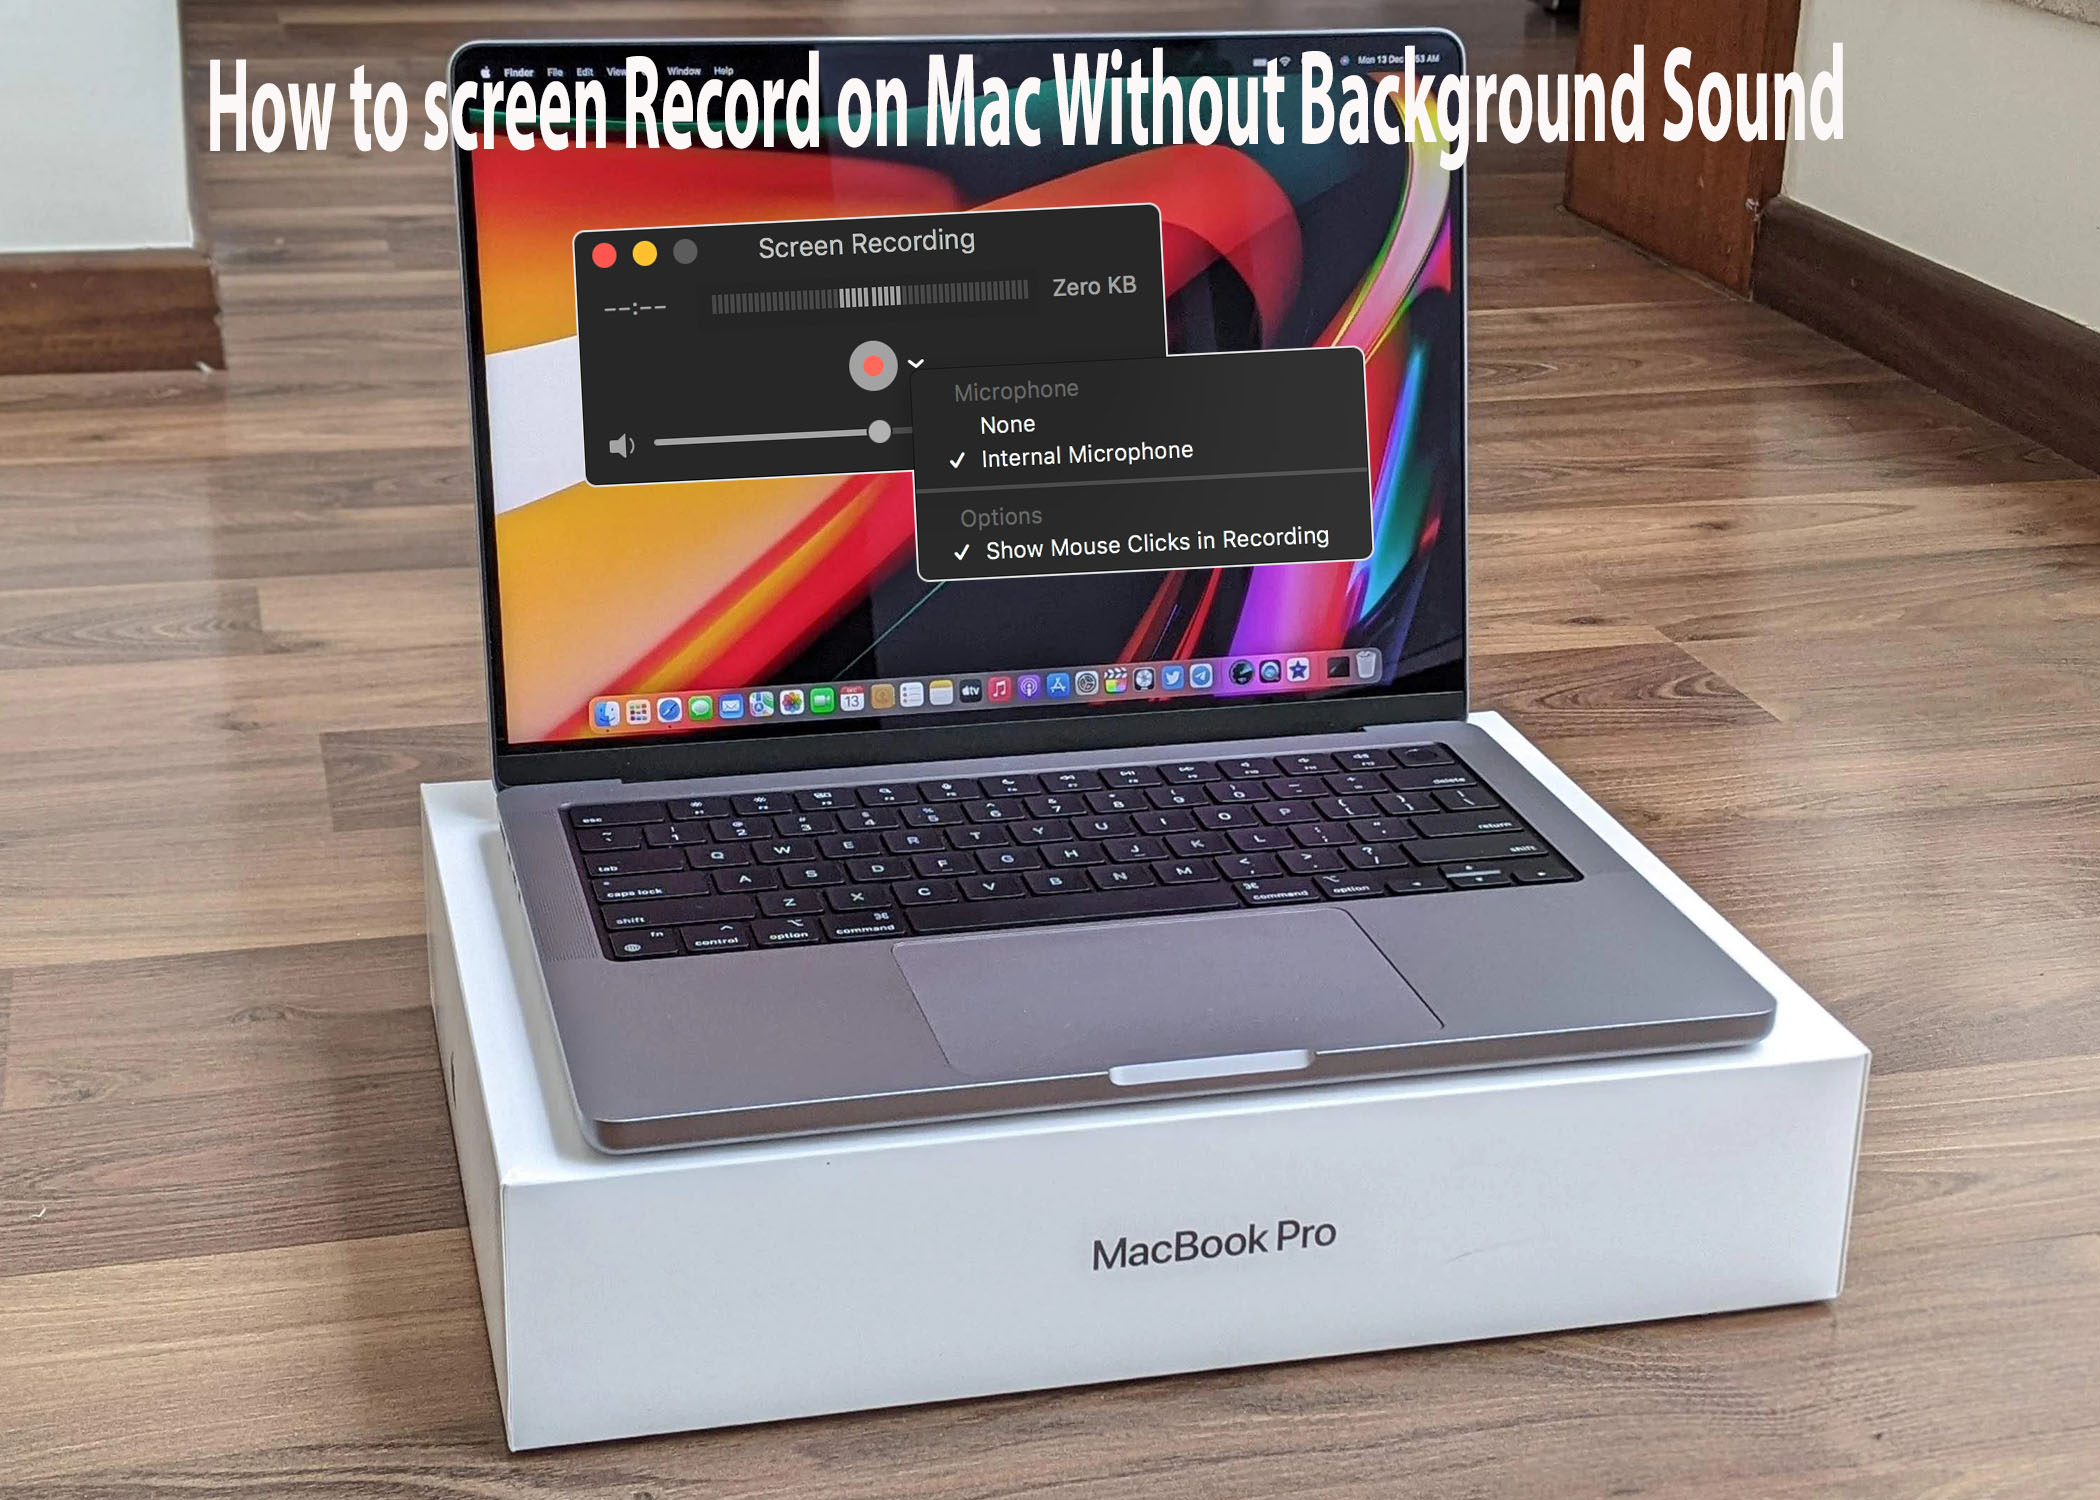 How to screen Record on Mac Without Background Sound